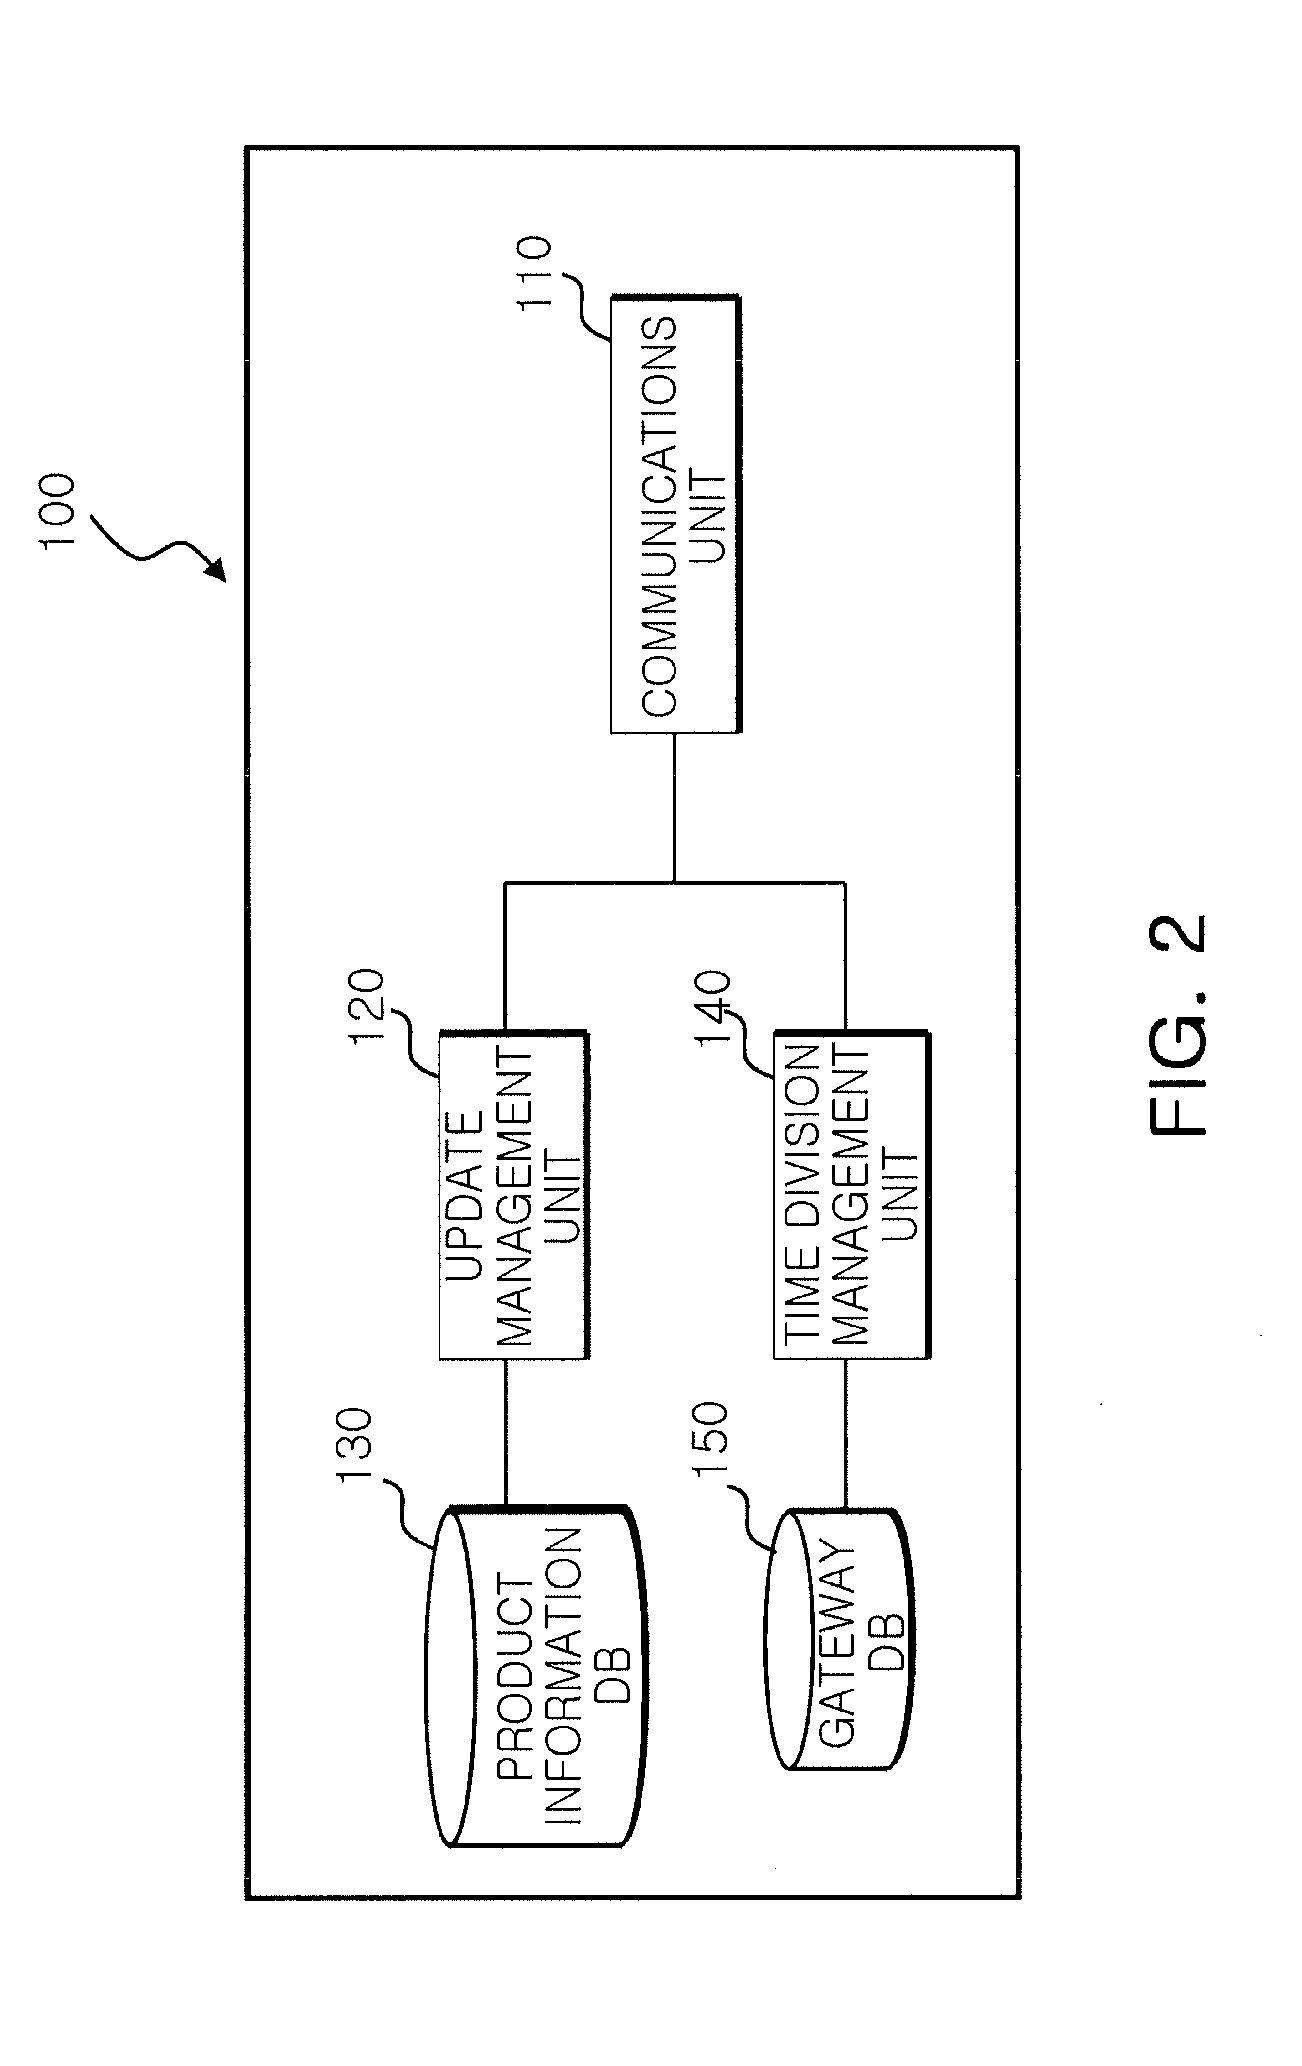 Electronic shelf label system and method of operating the same